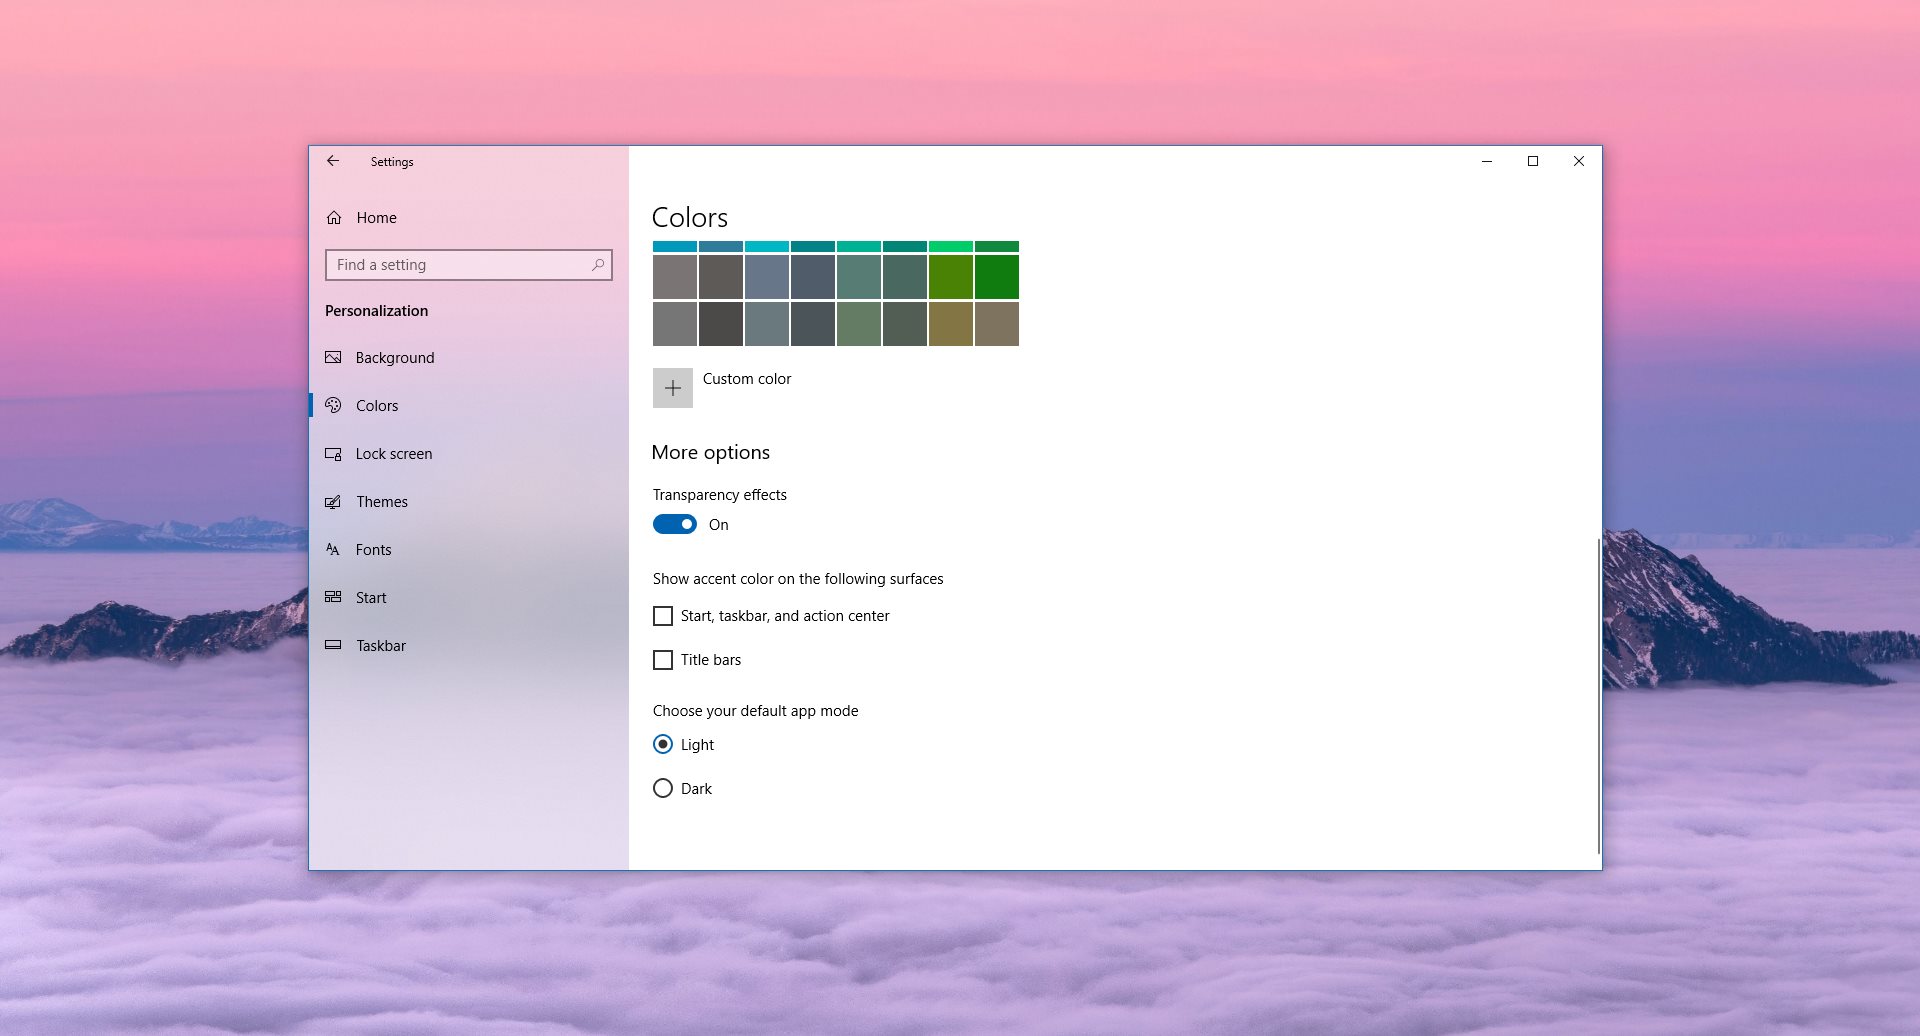 Windows 10 To Get New Customization Options With “choose Default